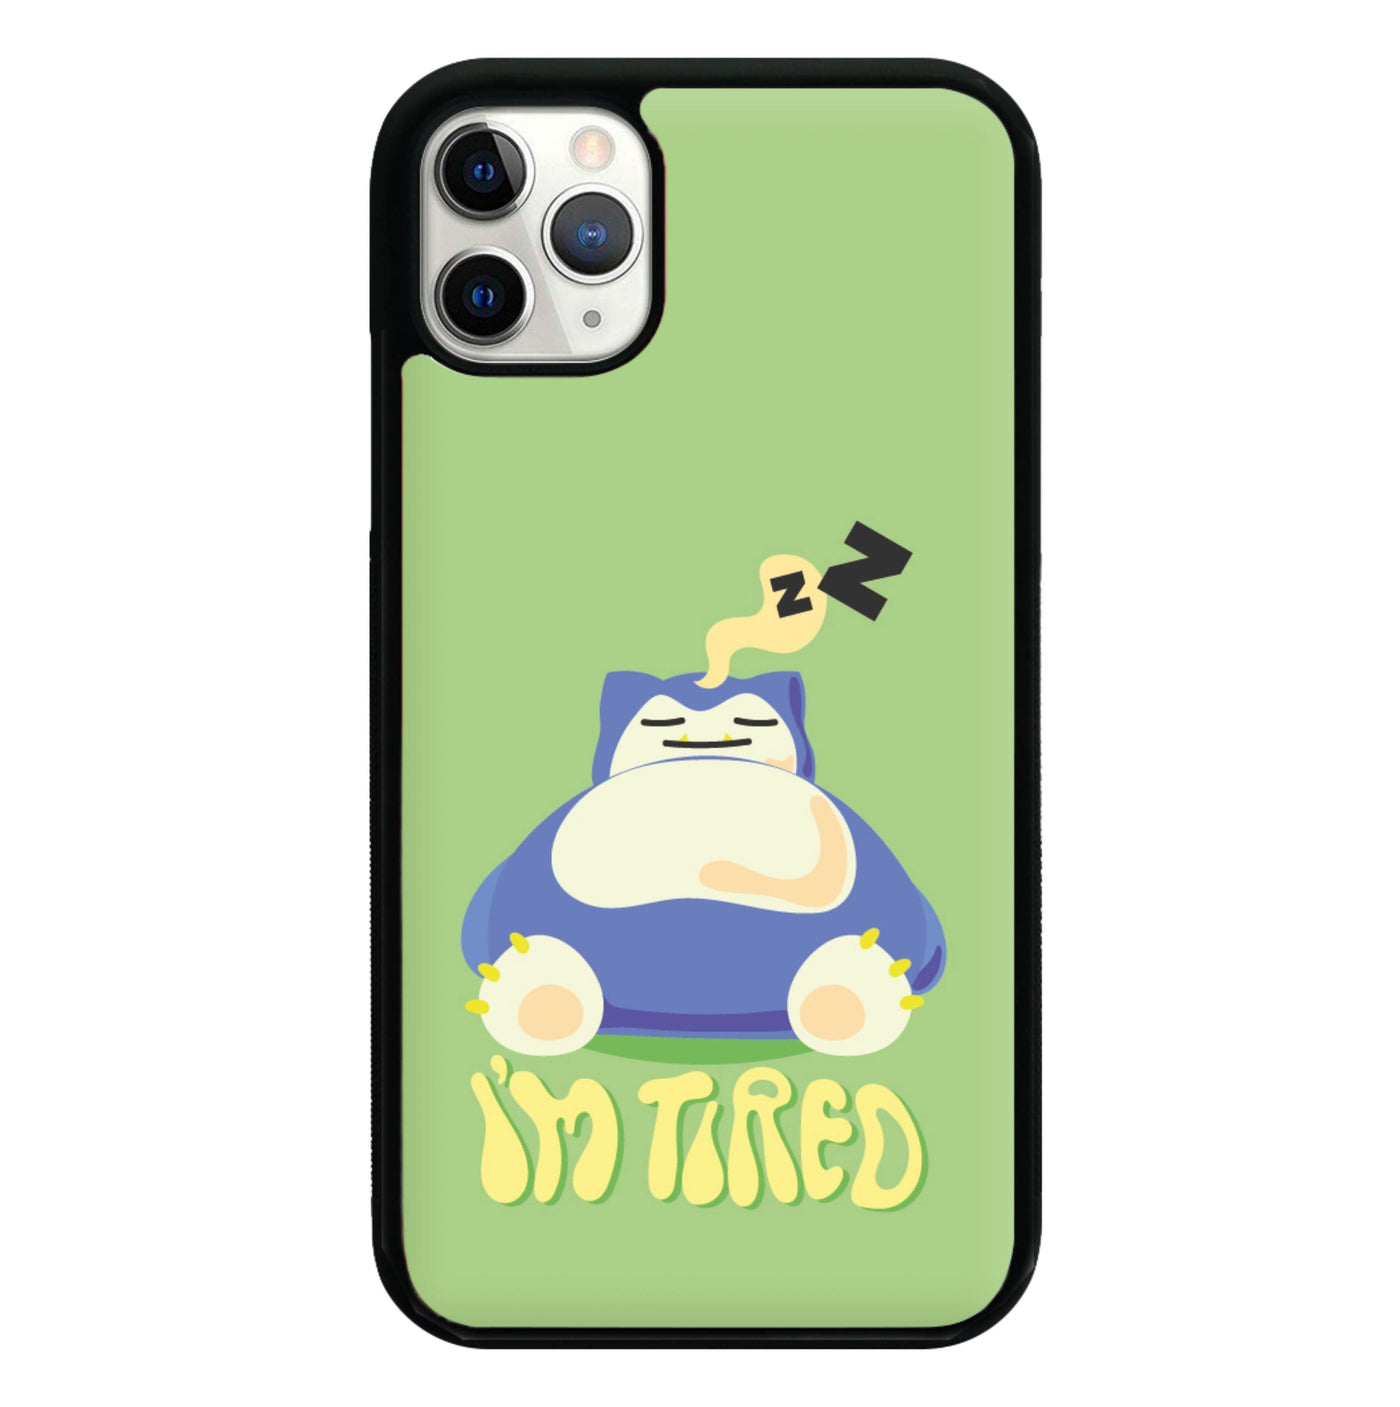 Pokemon iPhone 8 Plus Case by Abstract Edge - Pixels